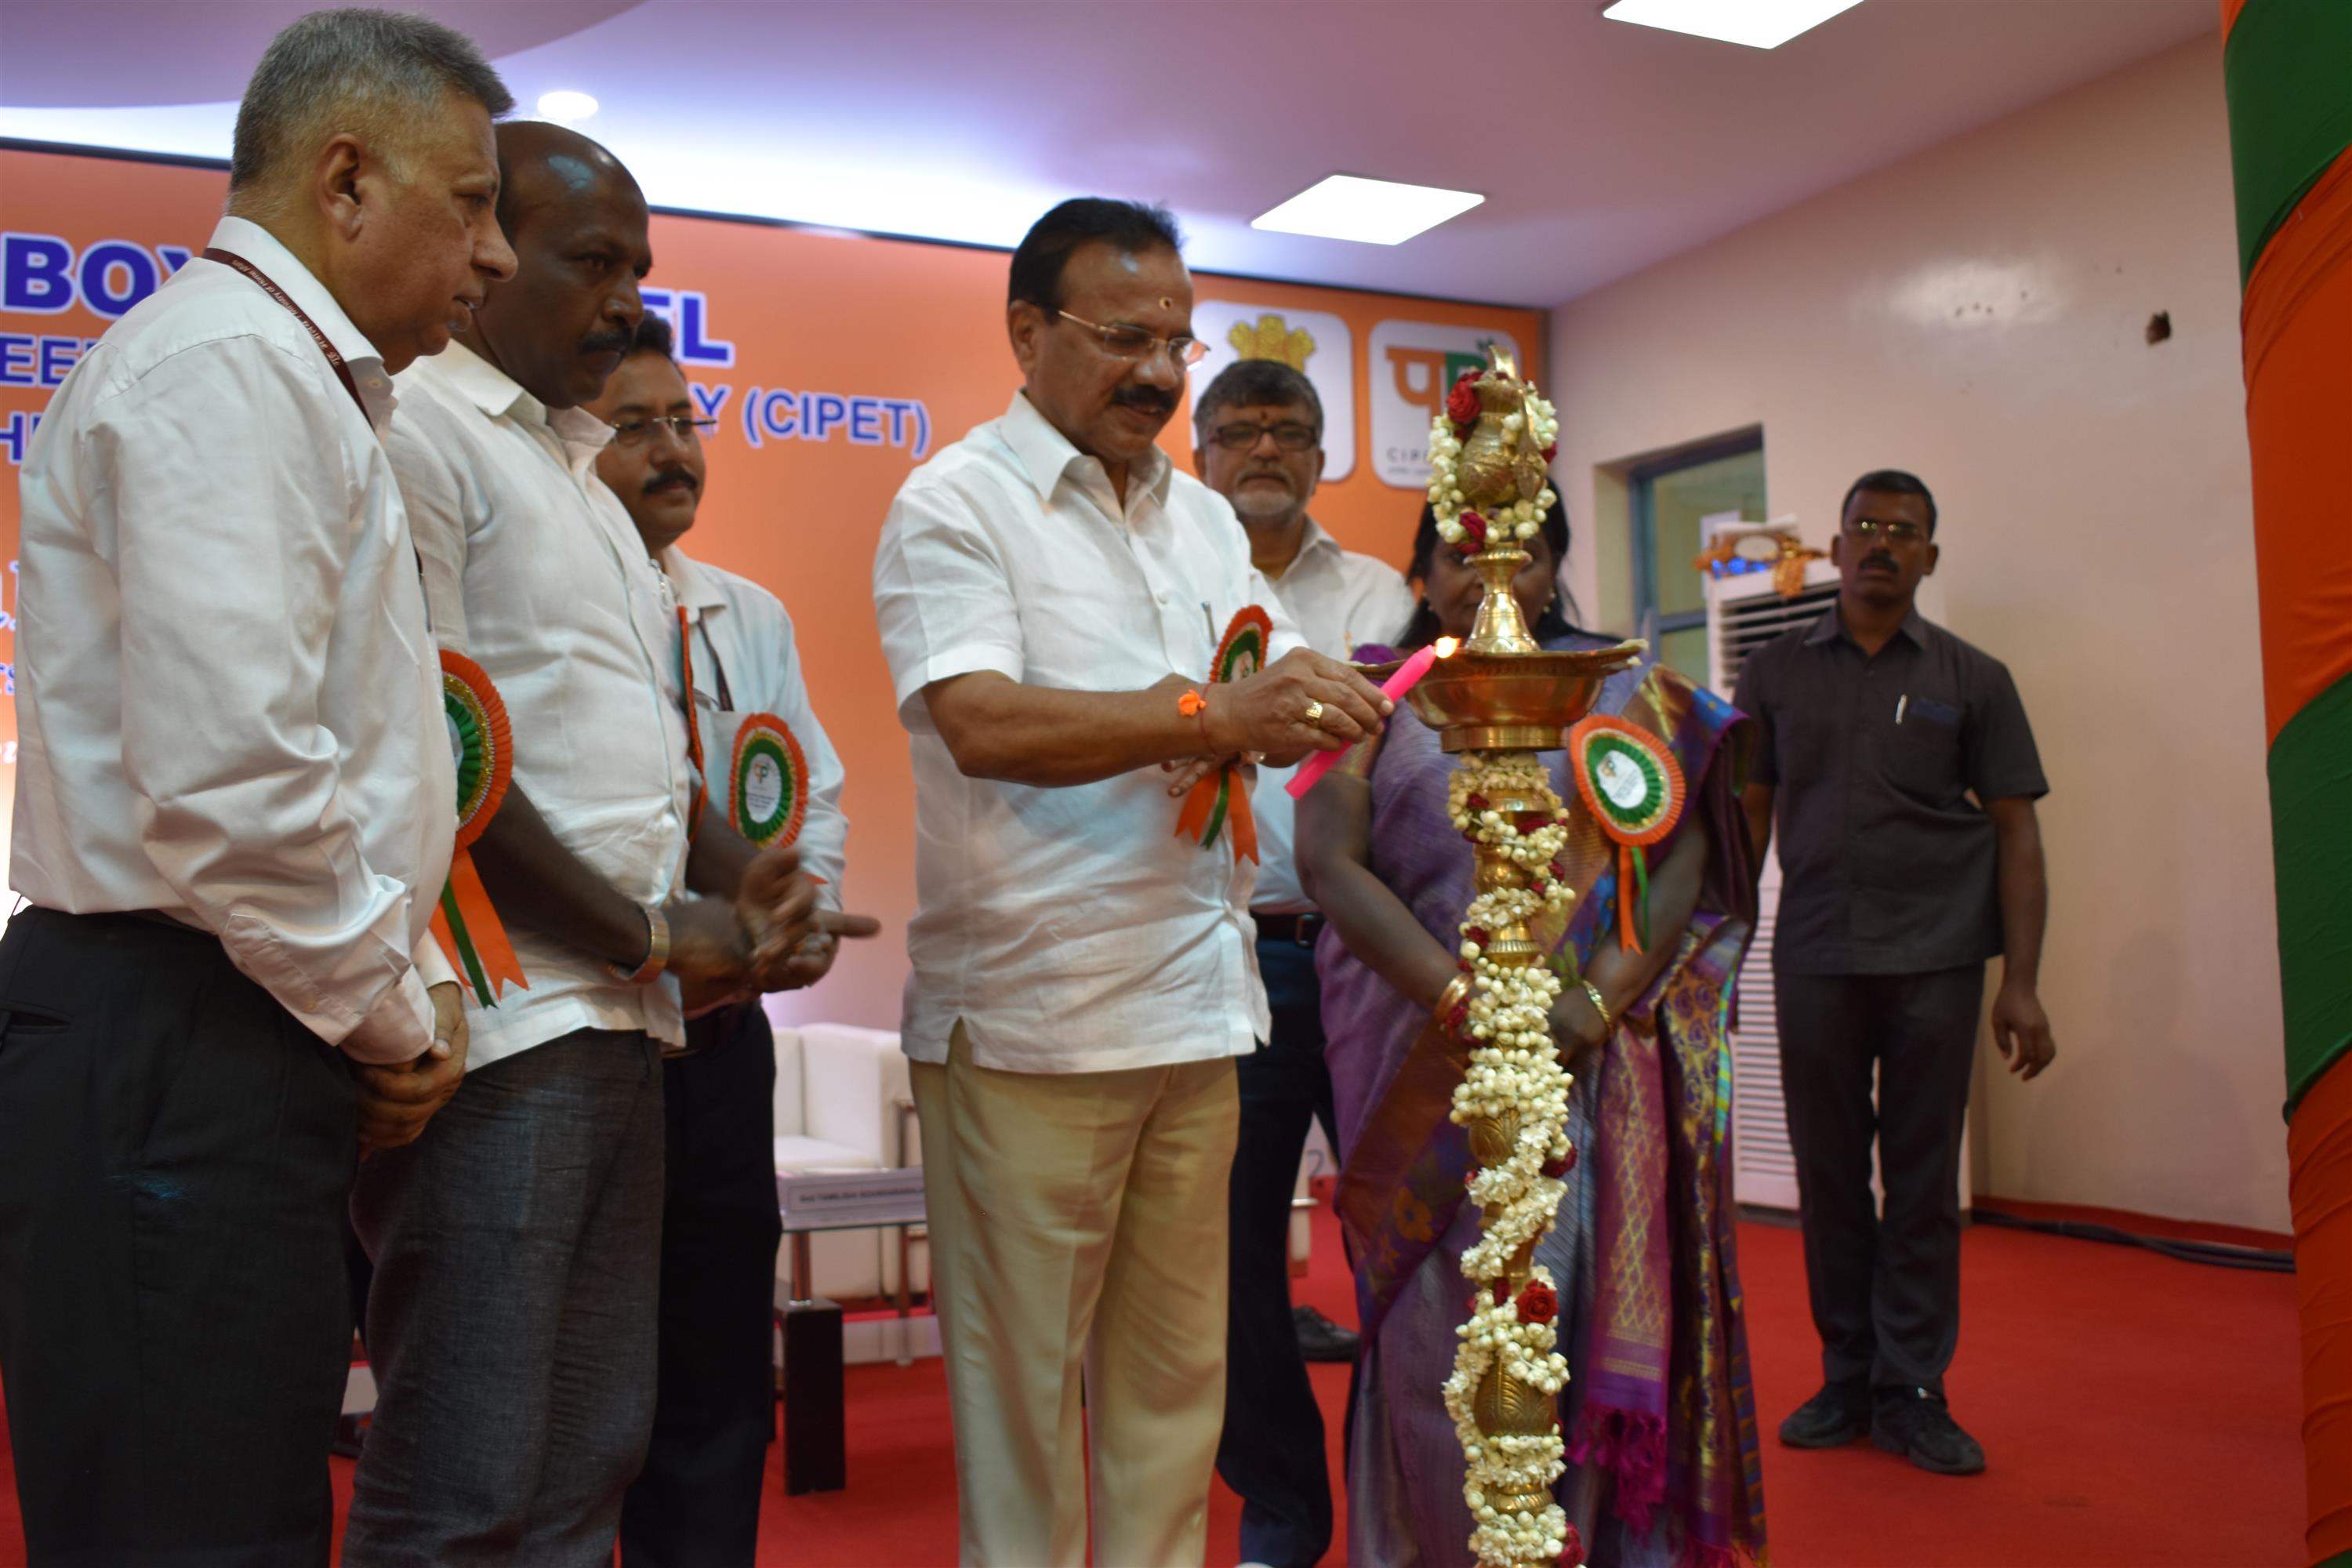 Shri. D. V. Sadananda Gowda, Union Minister for Chemicals & Fertilizers lighting the tradional lamp to mark the inauguration of the Boys Hostel of the CIPET: Institute of Plastics Technology, Deptt. Of Chemicals & Petrochemicals, Ministry of Chemicals & Fertilizers at Chennai, today (August 29, 2019)  